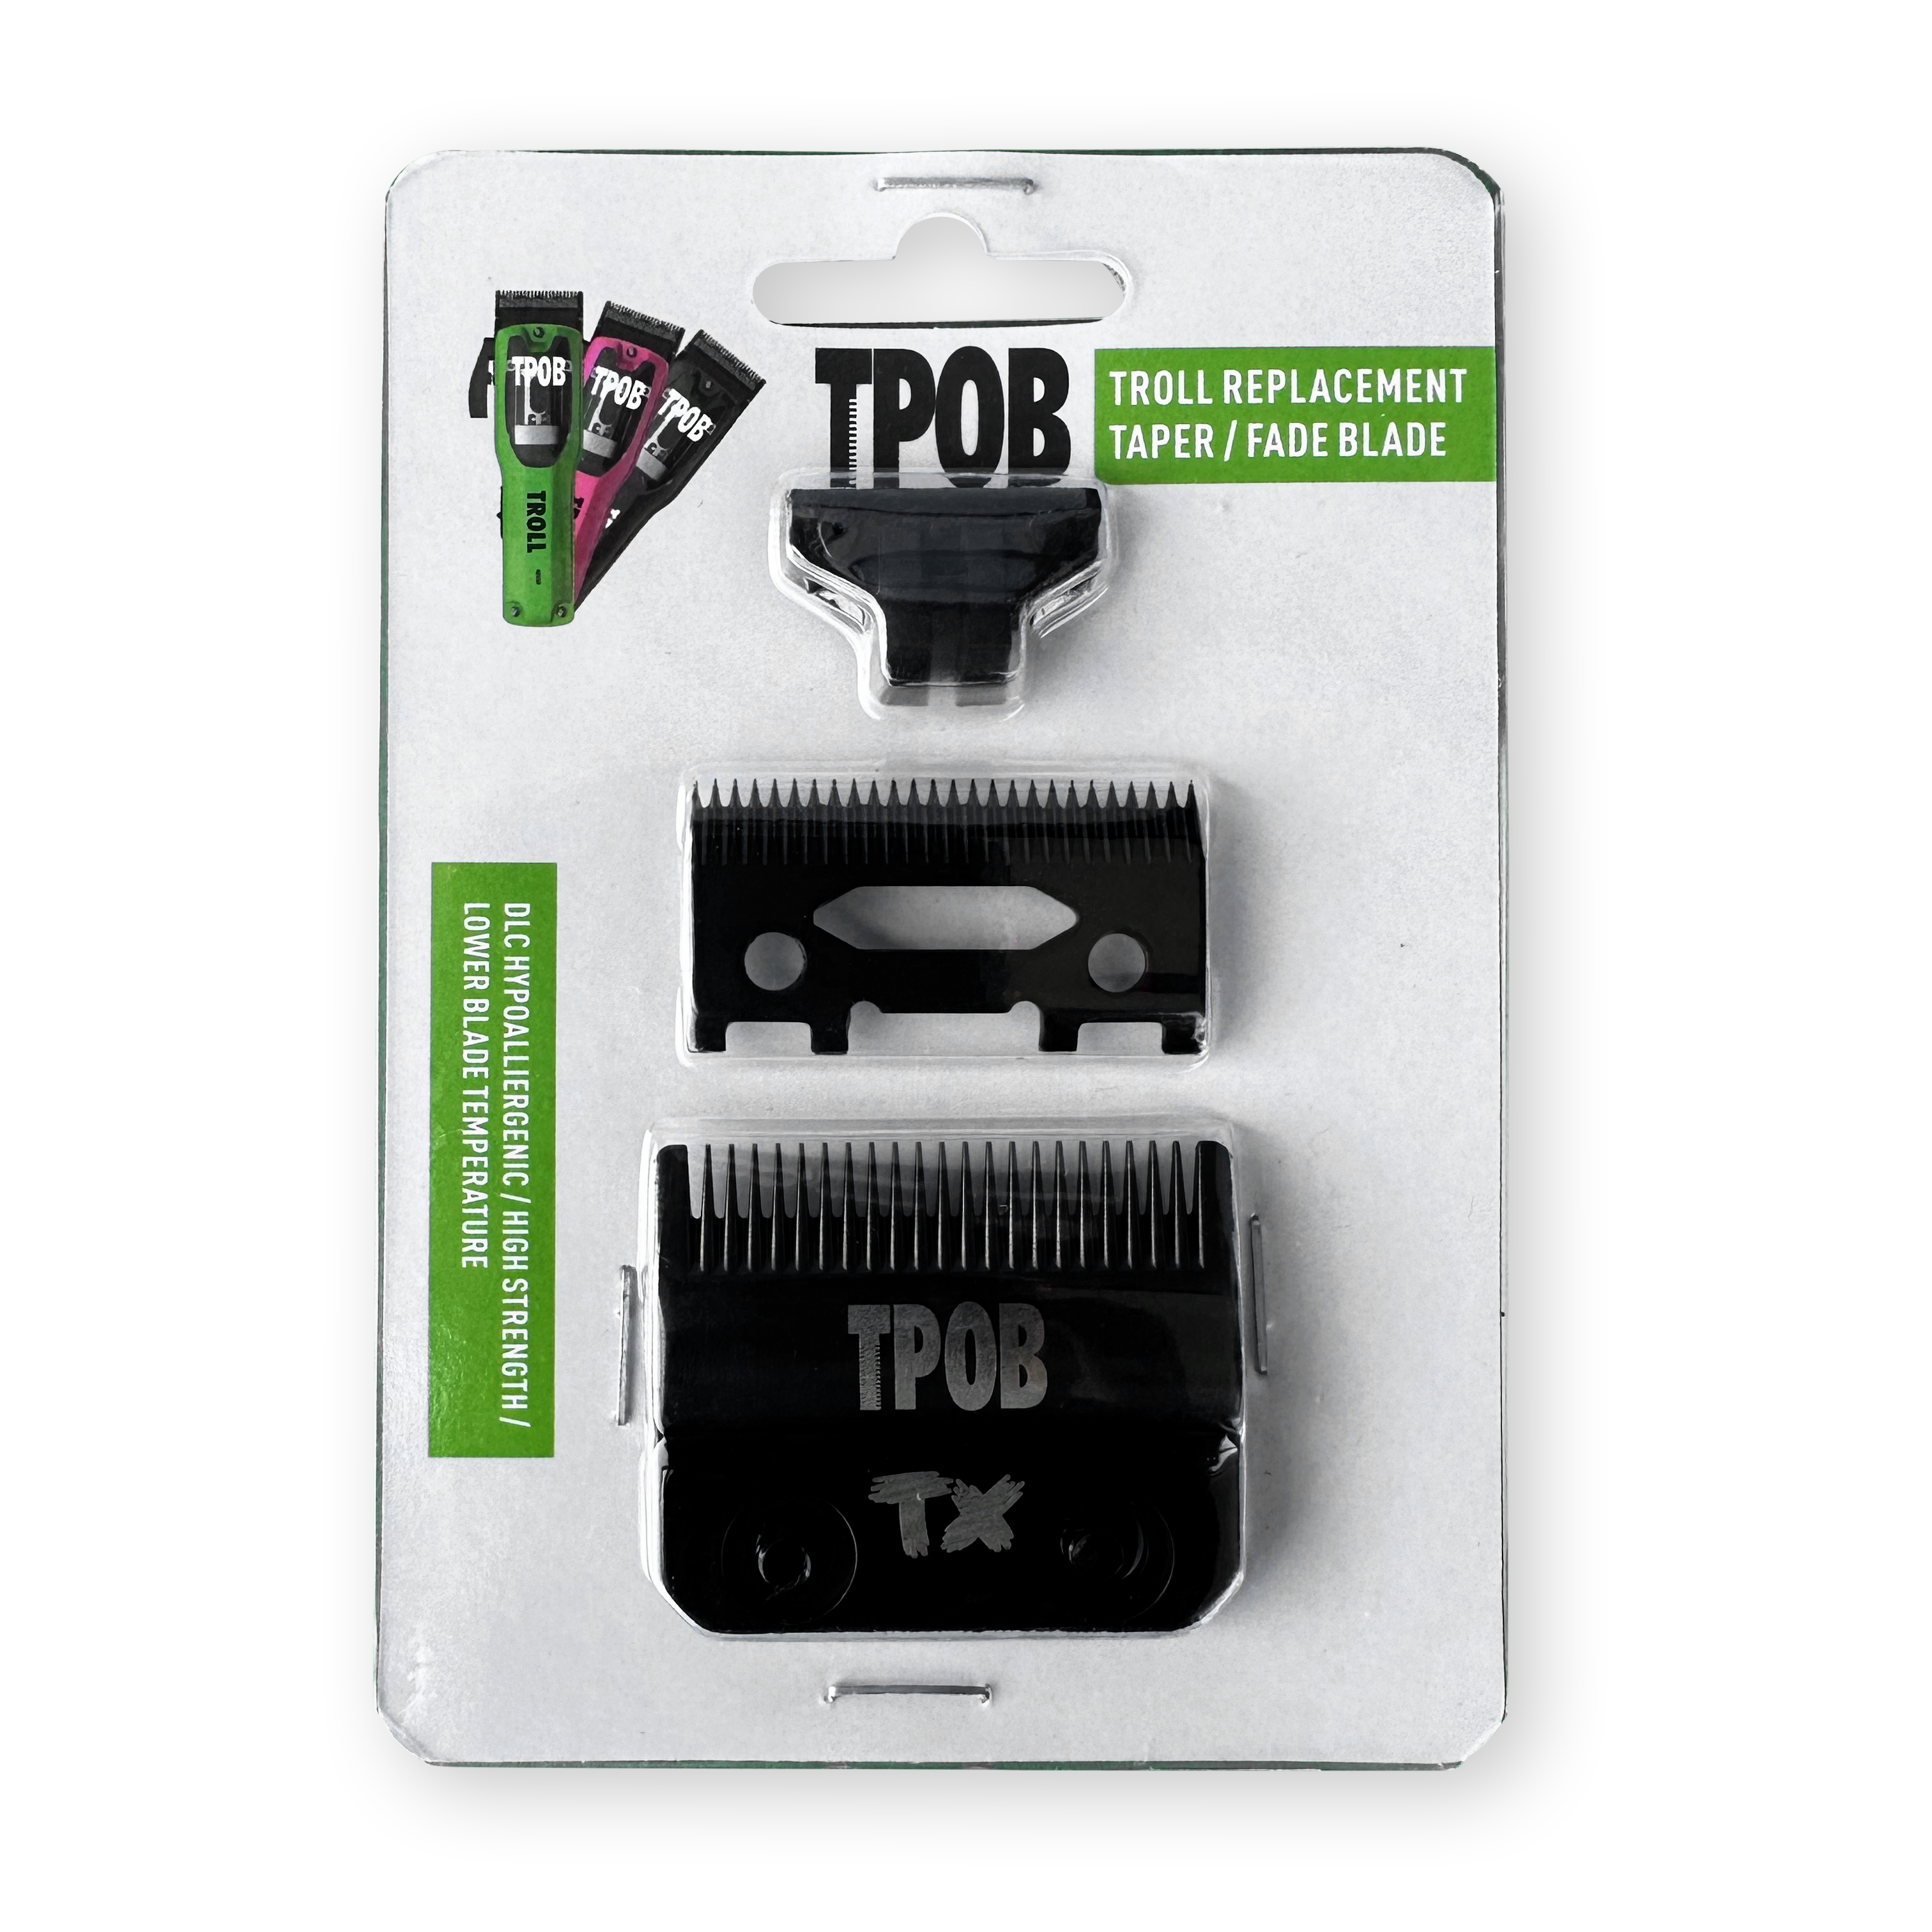 TX DLC Fade Blade for TROLL clippers with DEEP moving blade